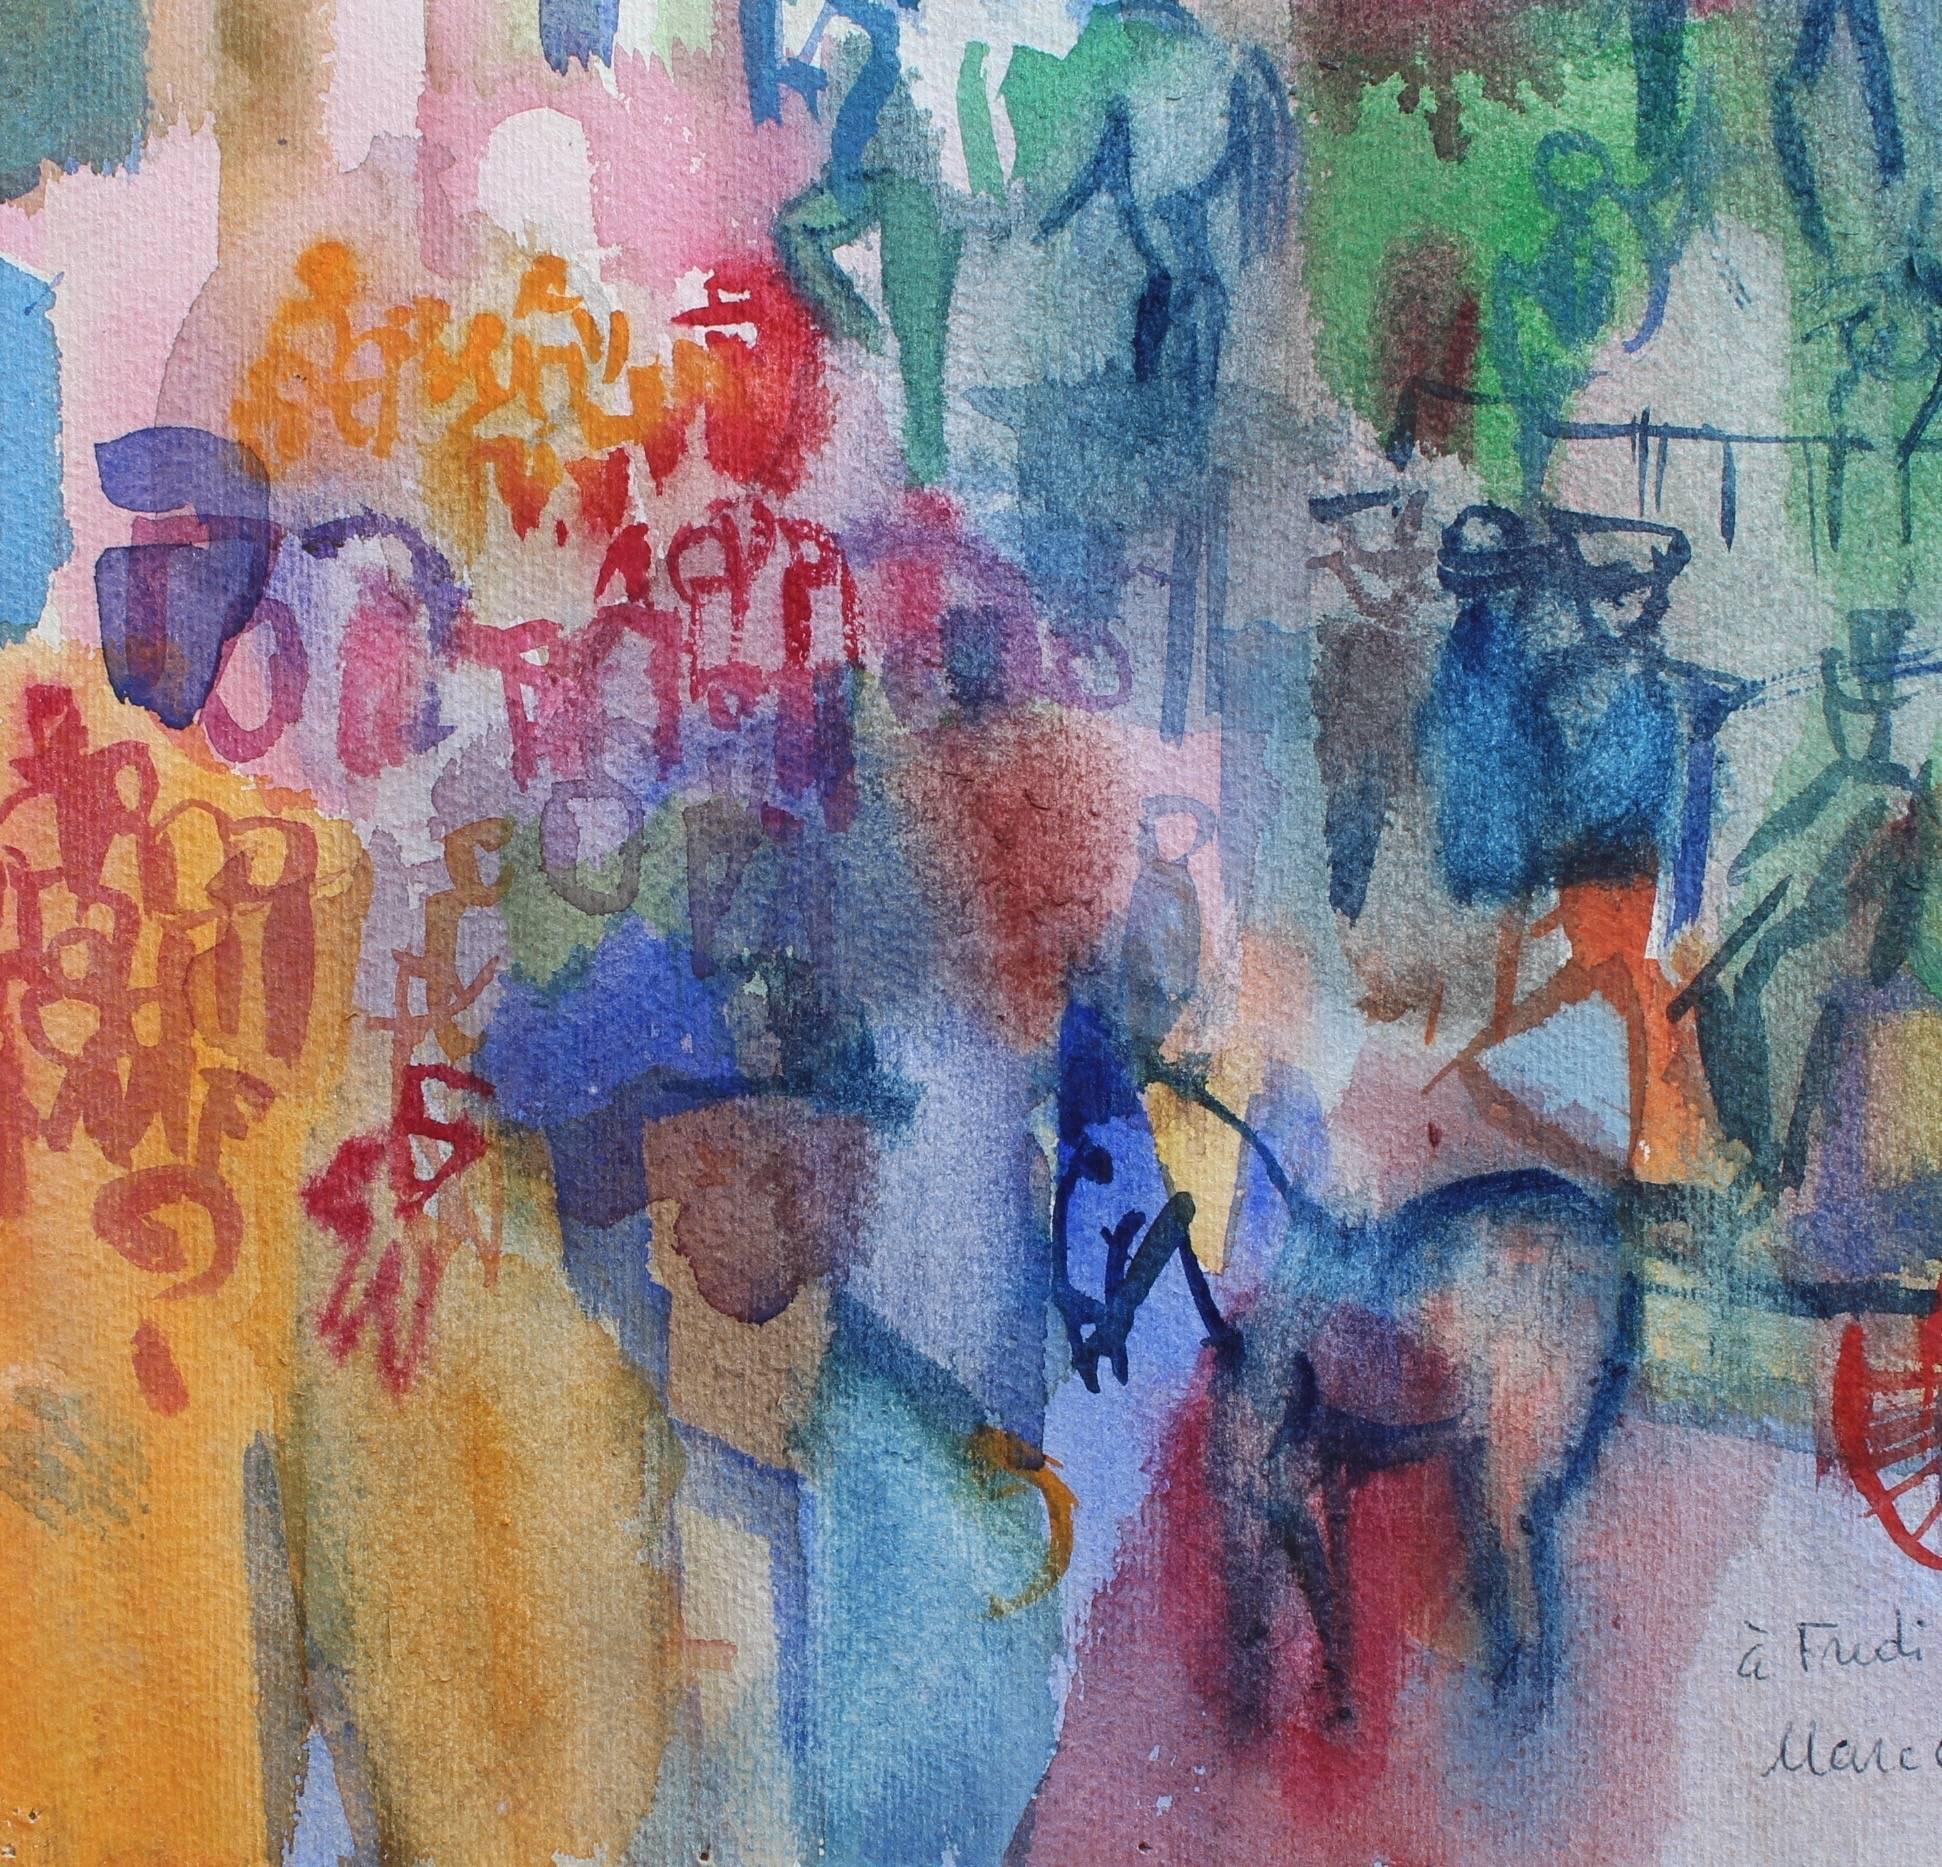 'Views of Florence II - Neptune and the Pigeons of the Piazza Signoria', watercolour on paper (1958), by Marcella (Unknown). A second painting in the series - this is another delightful, radiant depiction of Florence's monuments, buildings, people